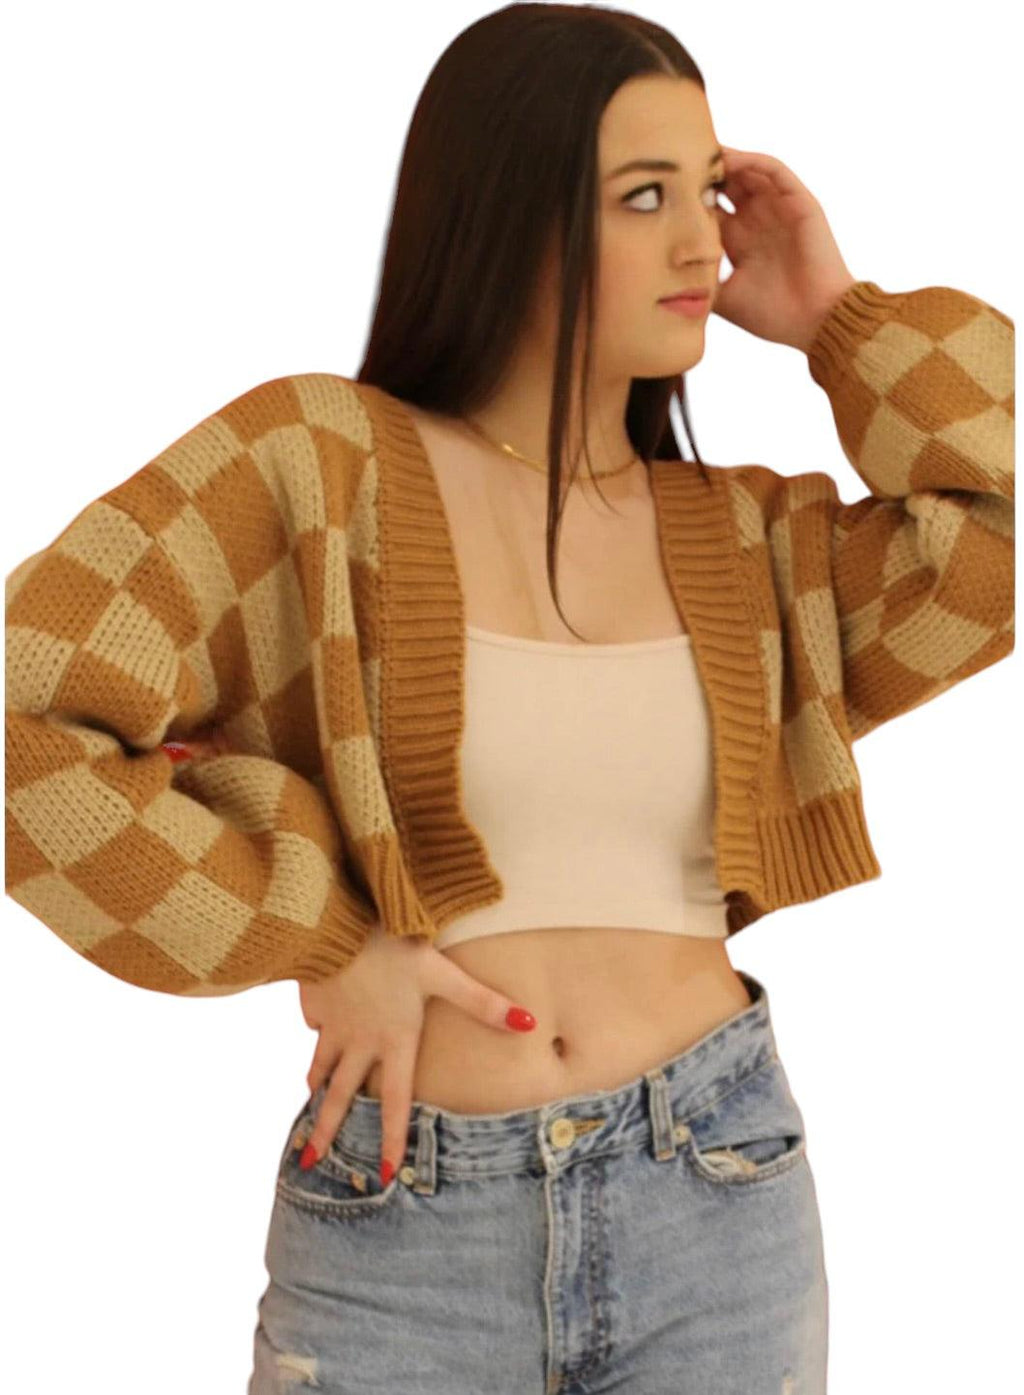 Checkered cropped sweater - Emily Reese Boutique